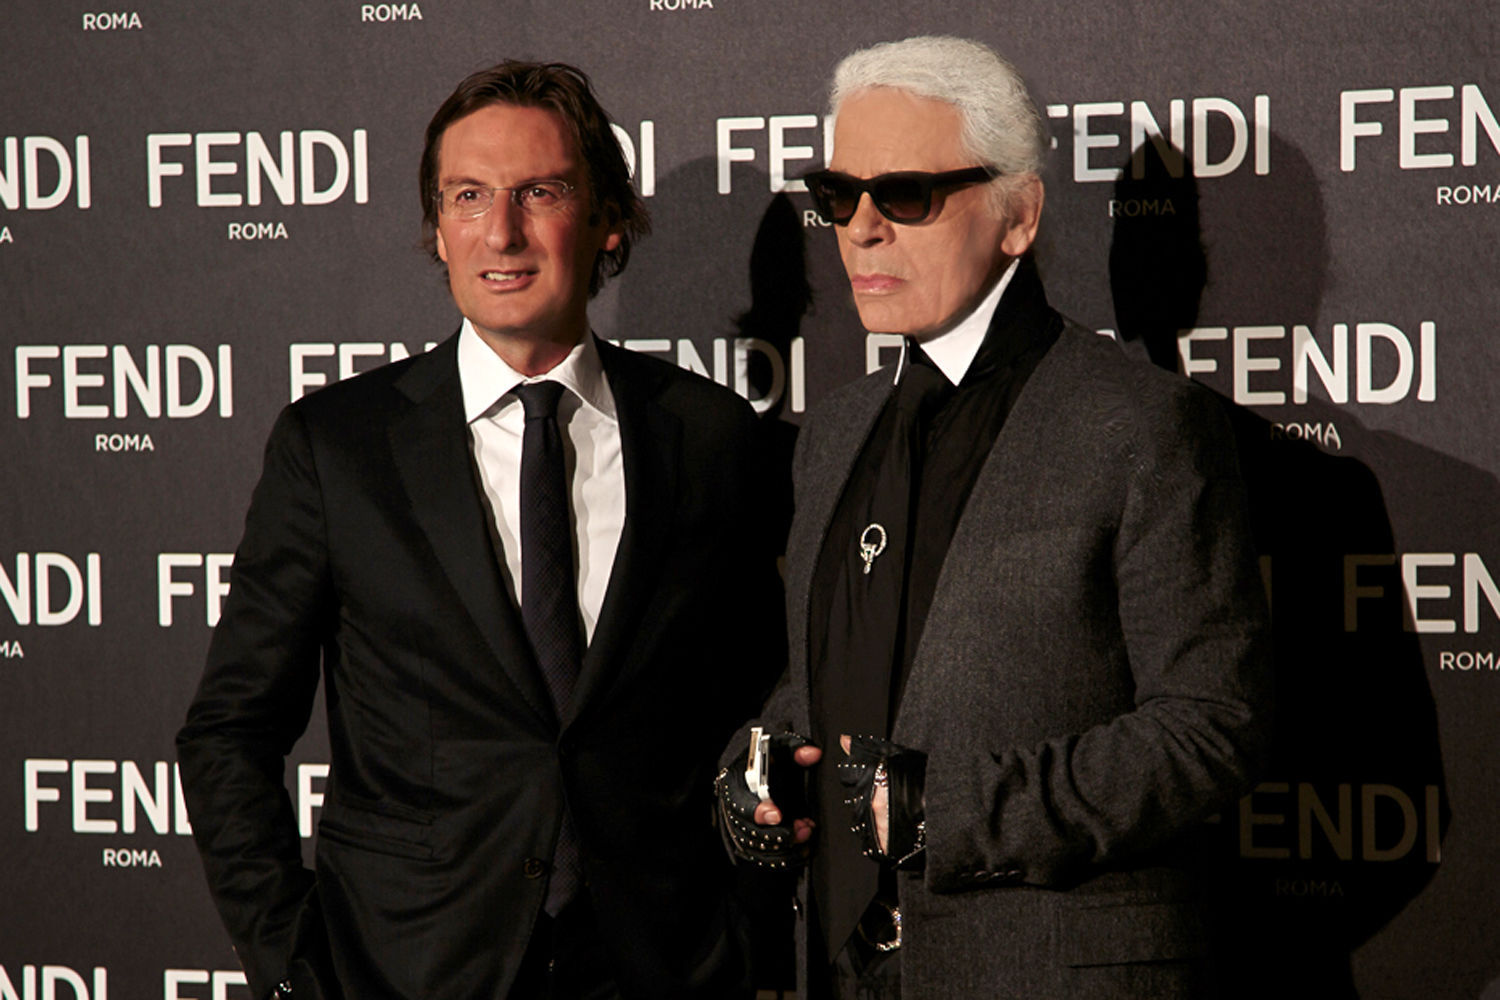 Karl Lagerfeld photo 75 of 83 pics, wallpaper - photo #636163 - ThePlace2